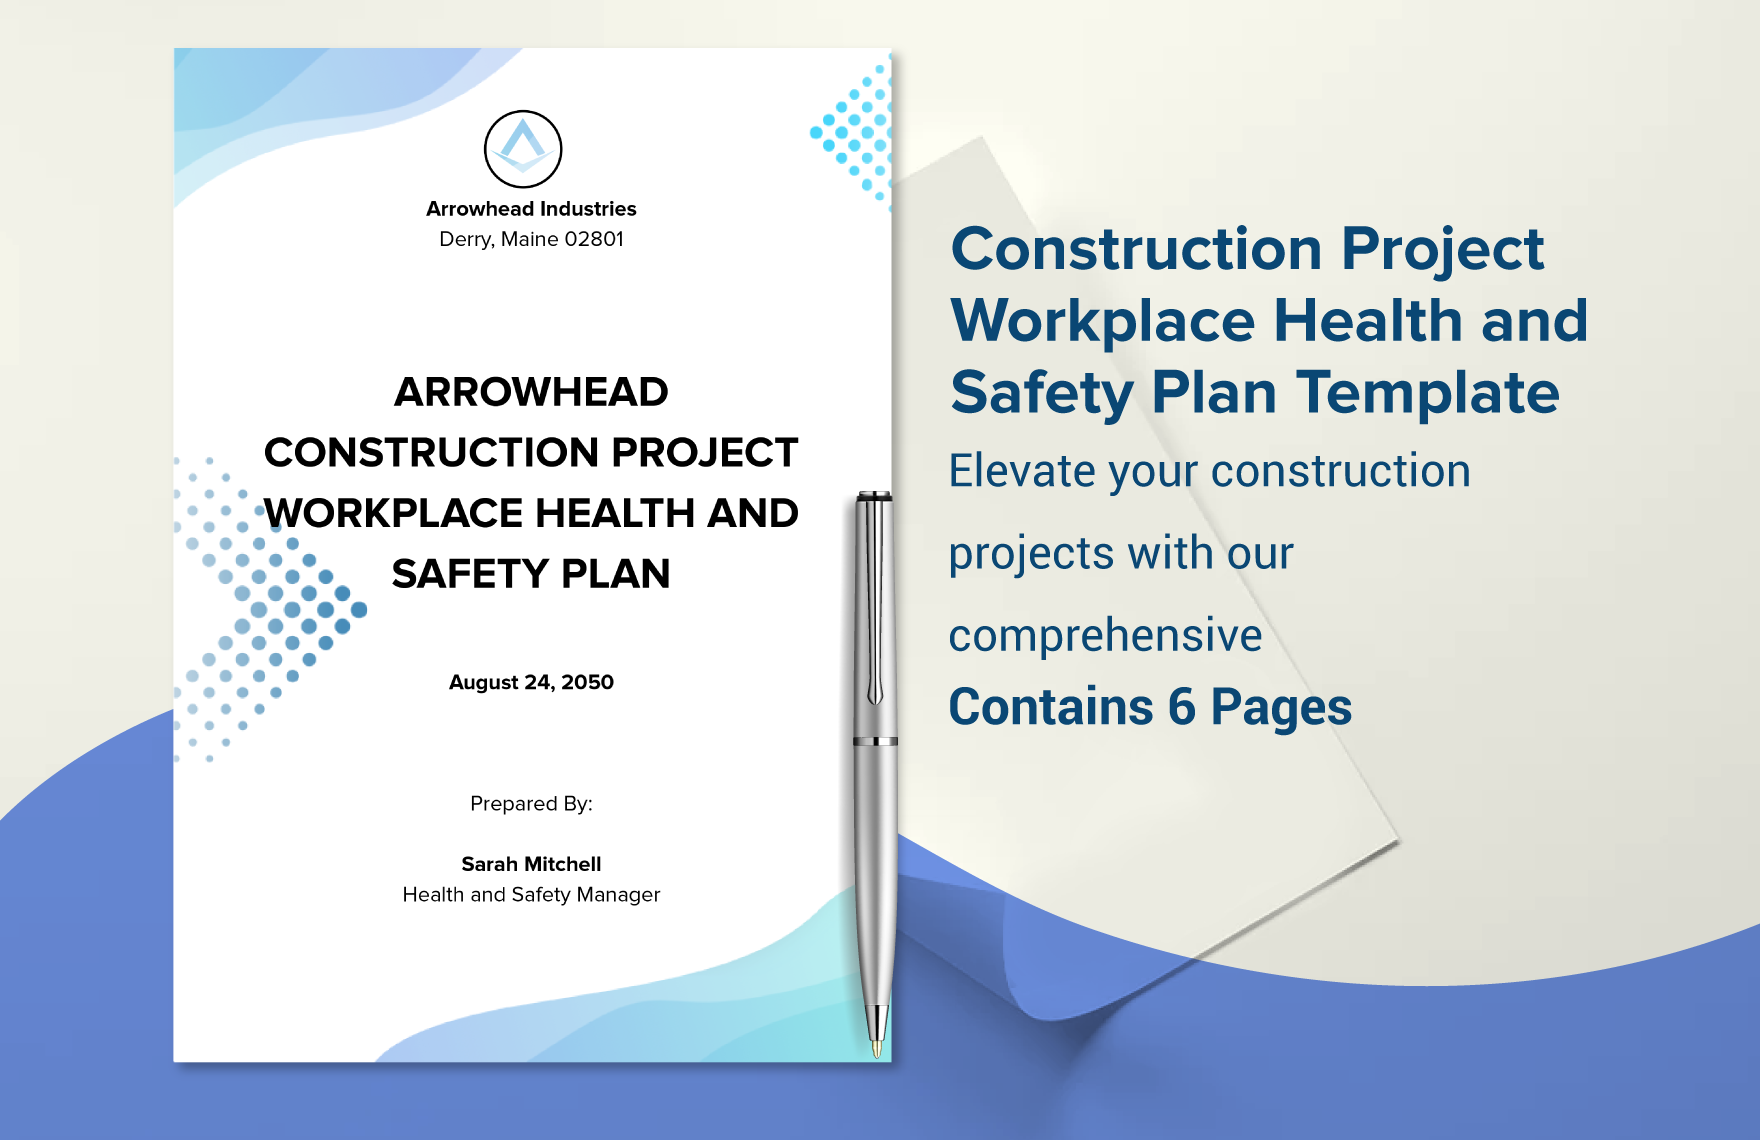 Construction Project Workplace Health and Safety Plan Template